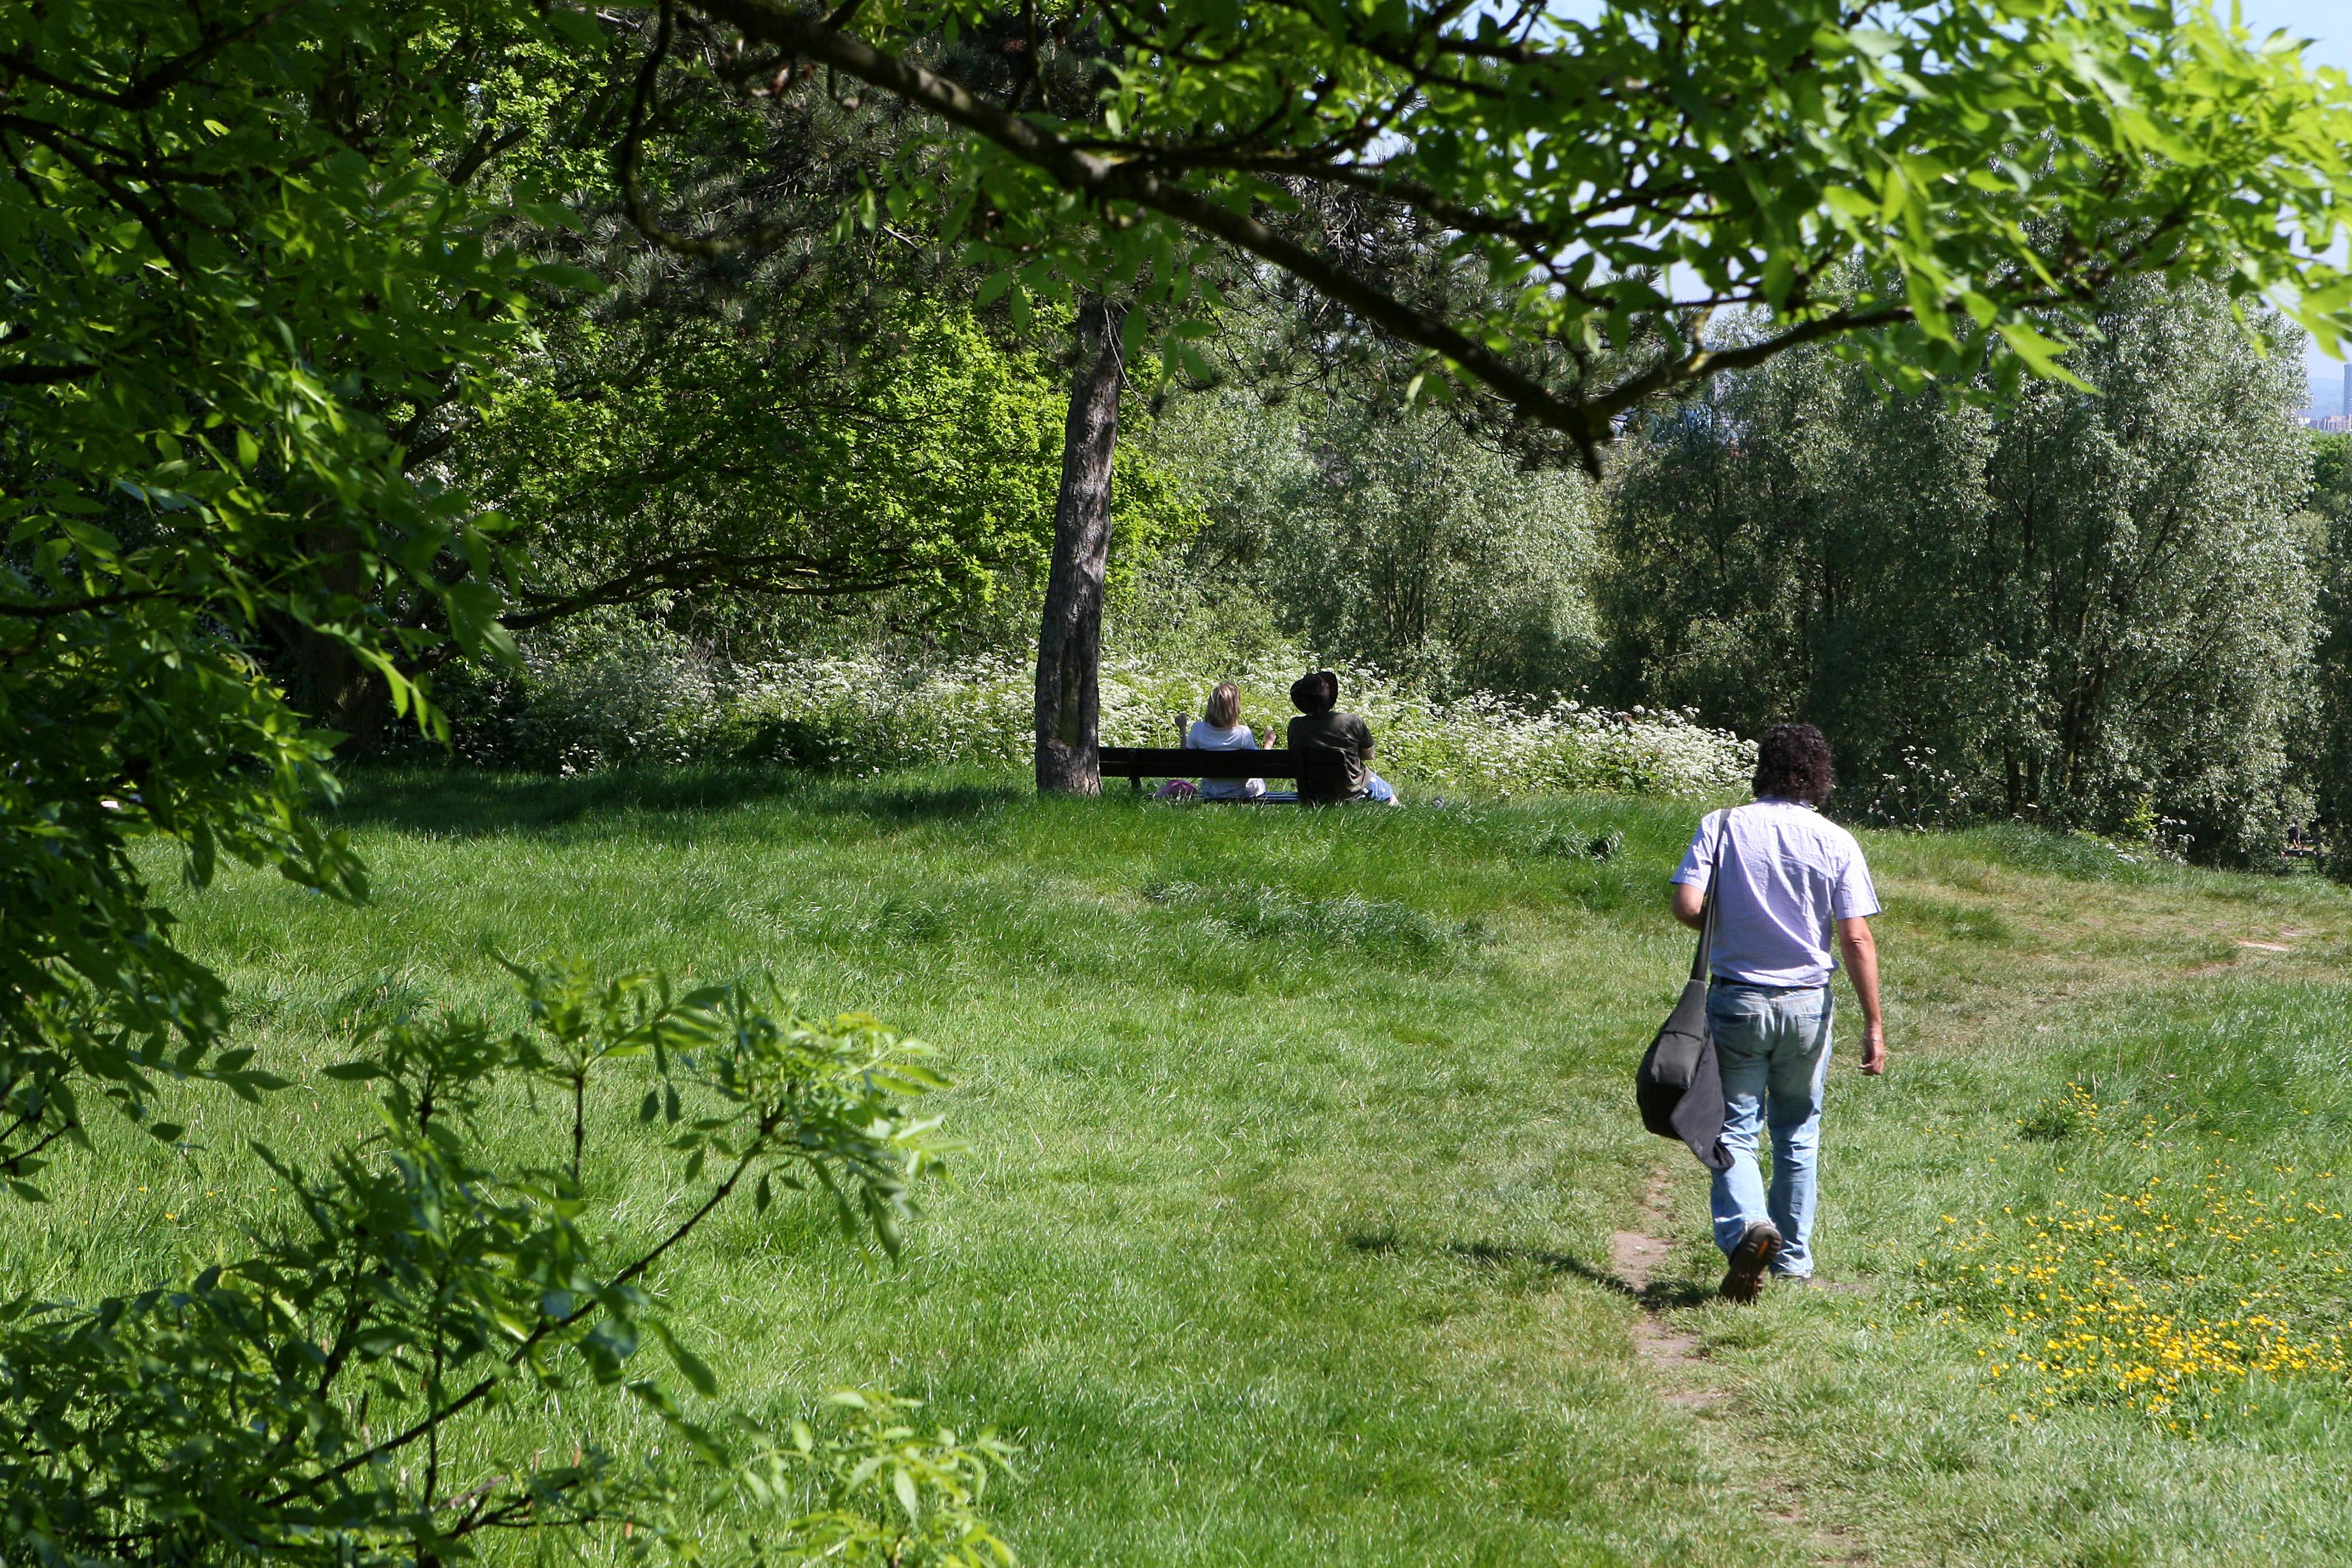 Temperatures on Saturday could be reach up to 26 degrees celsius- perfect for a walk in the park